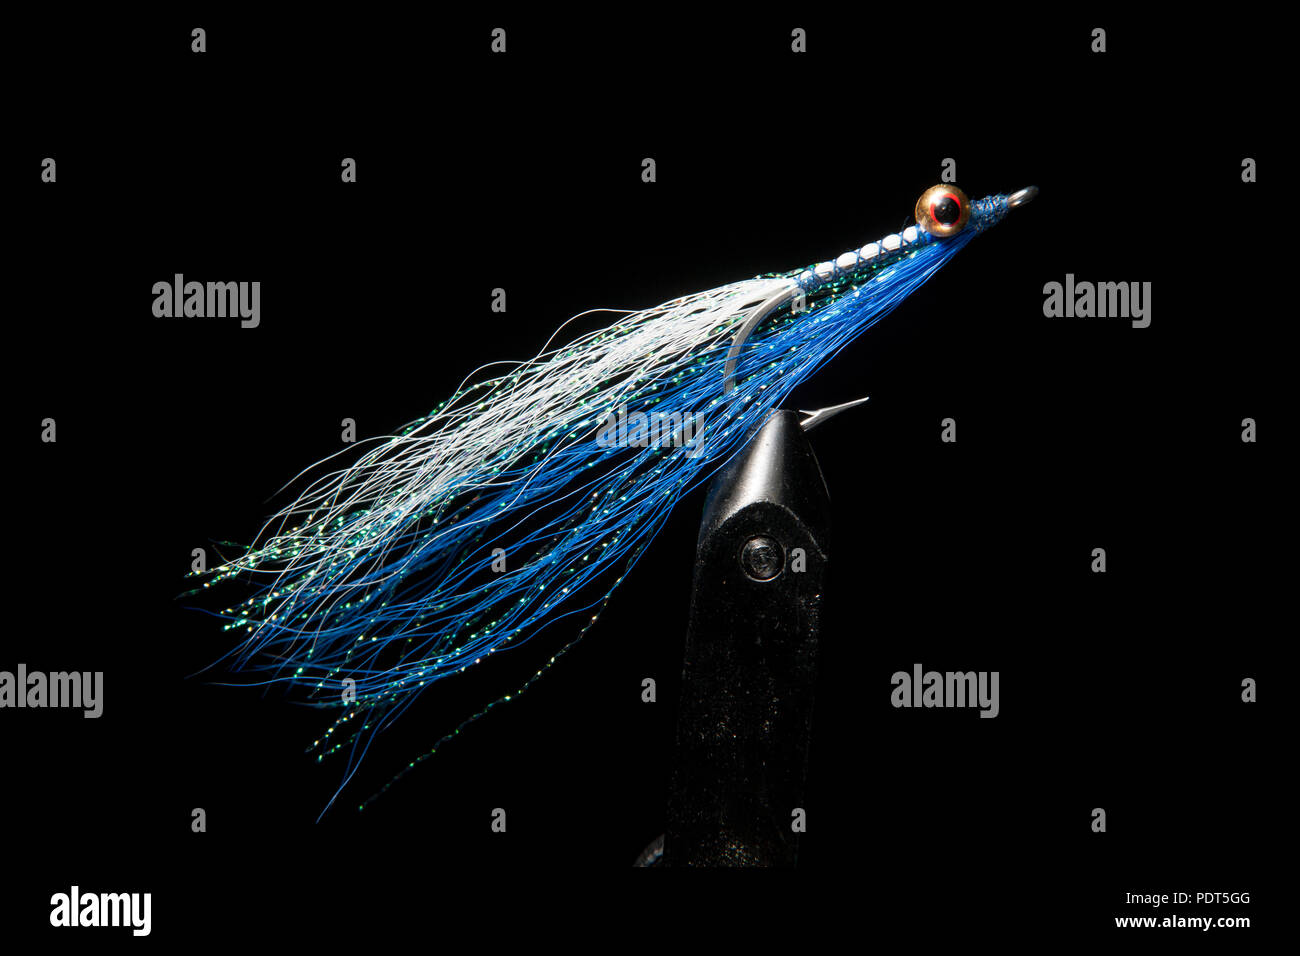 A saltwater fly, held in a fly vice, designed for catching predatory saltwater fish on a black background. Dorset England UK GB Stock Photo